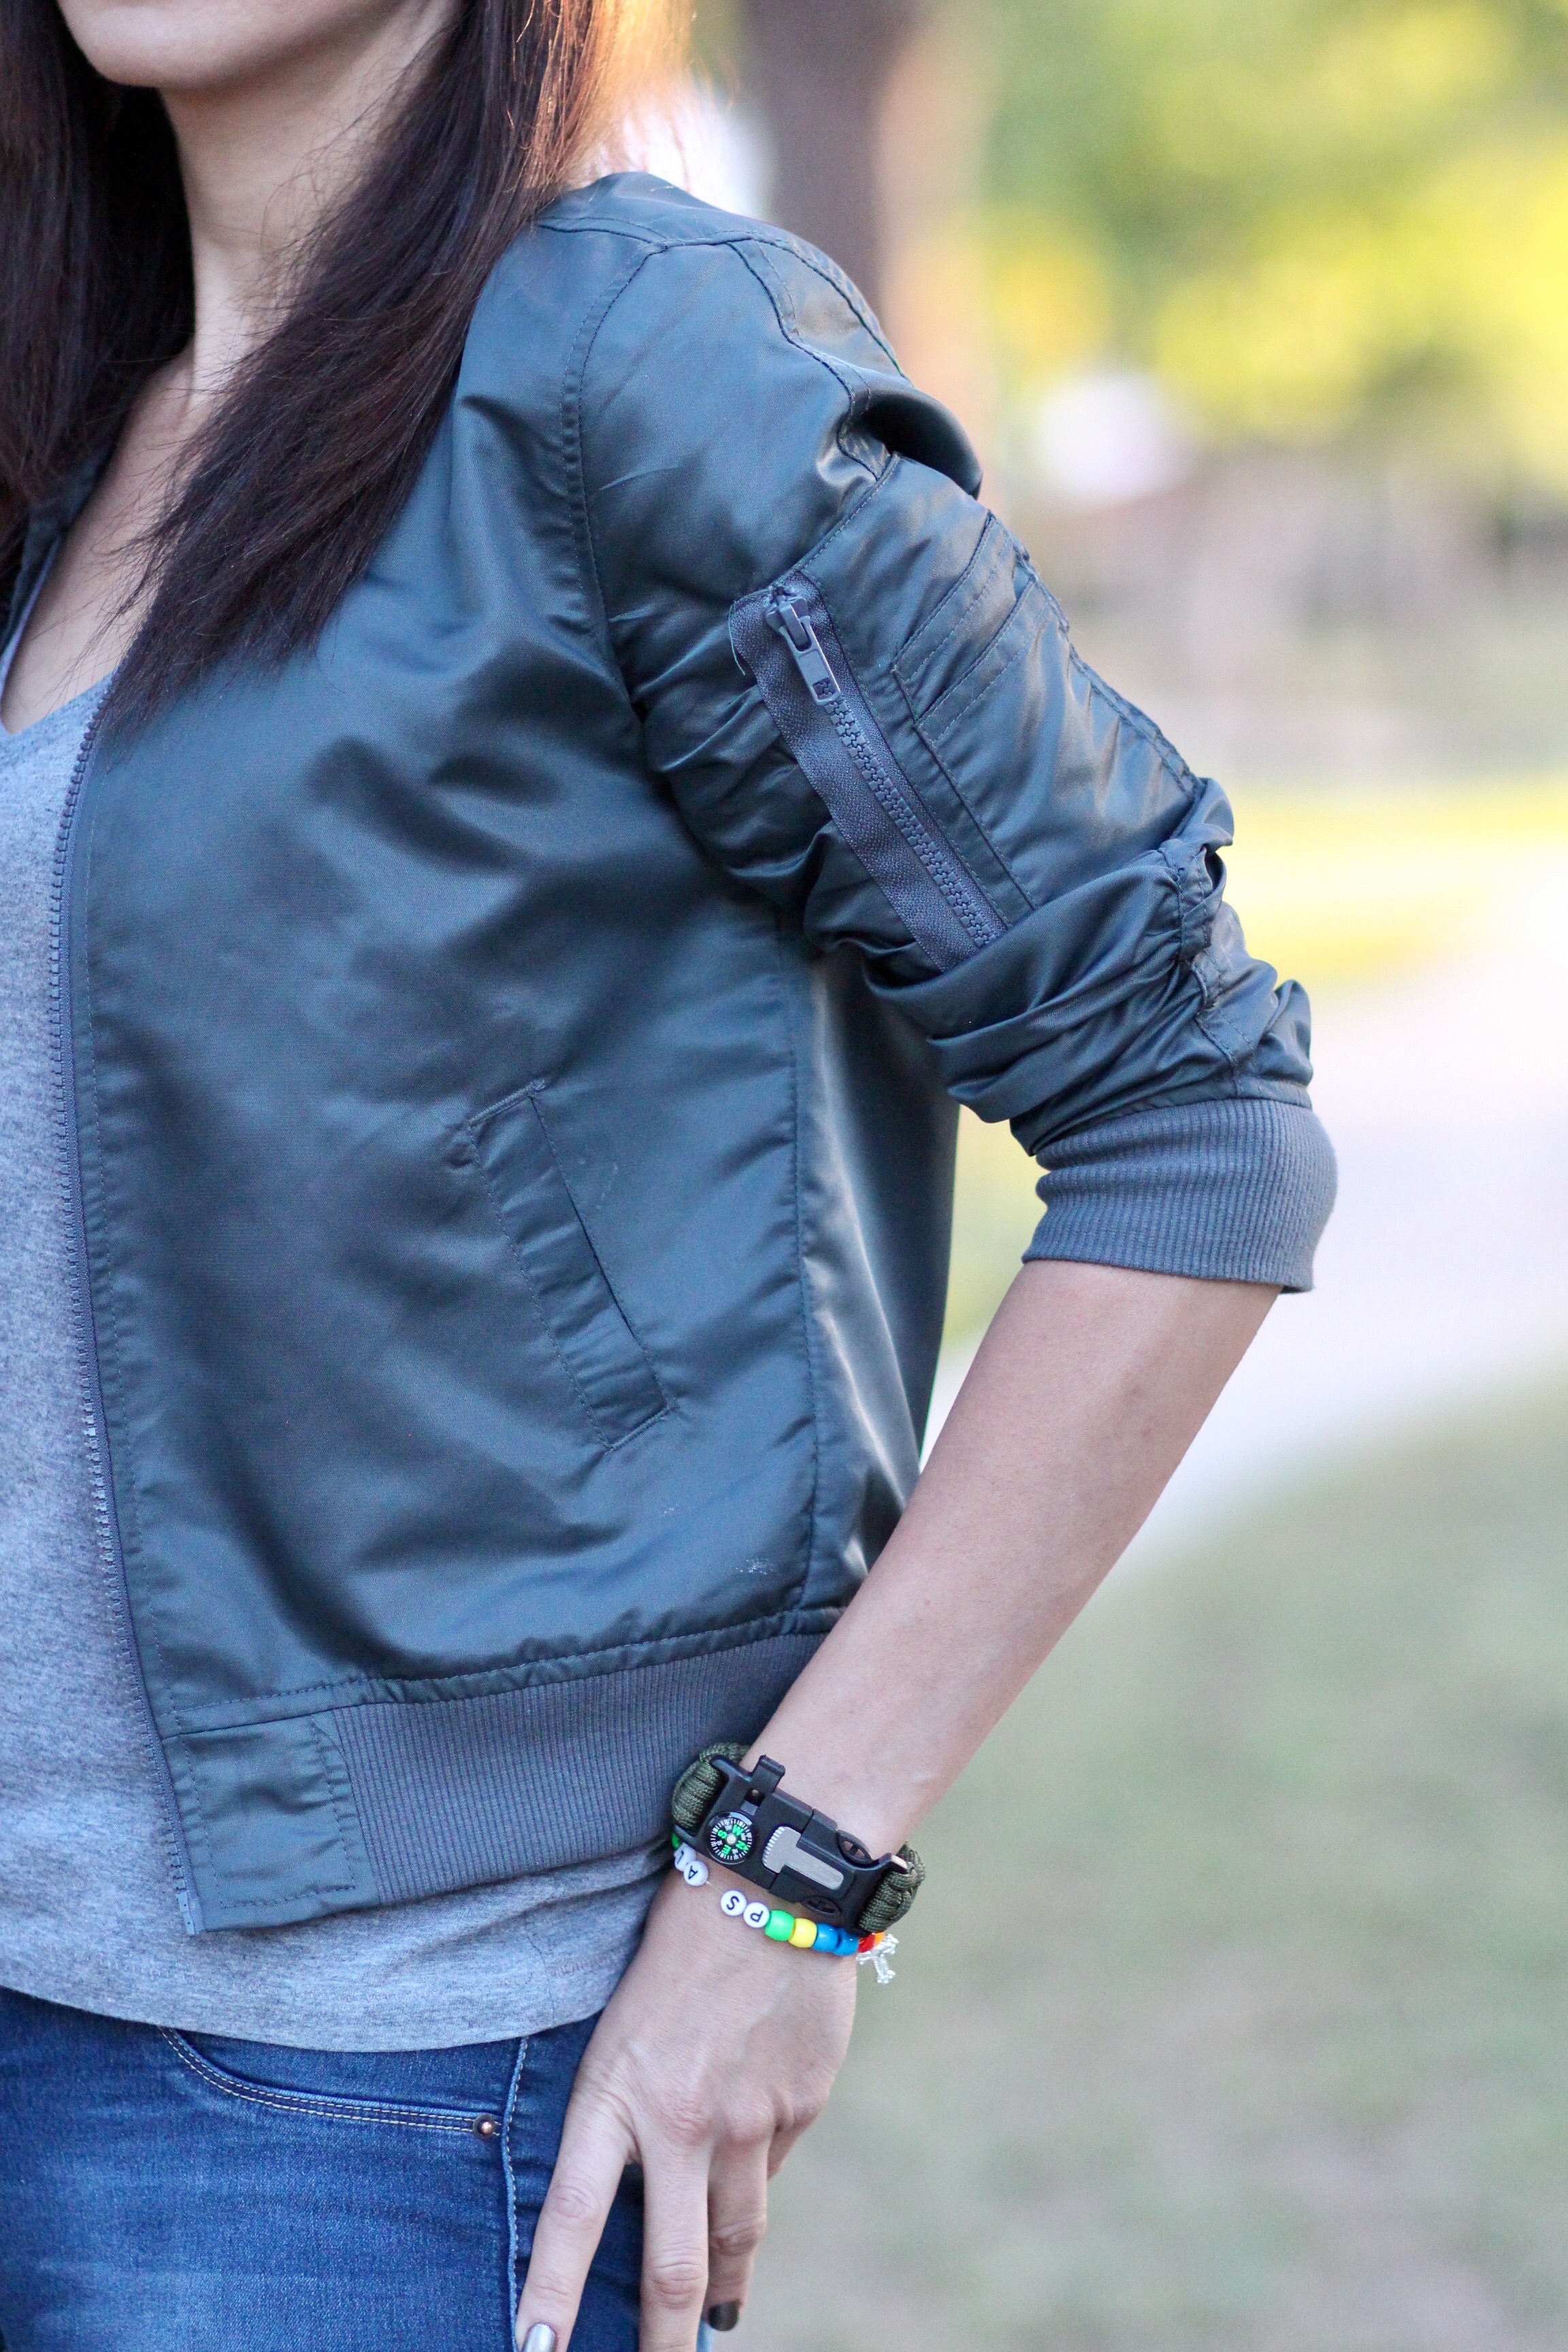 Bomber jacket with sleeve zipper detail and compass watch